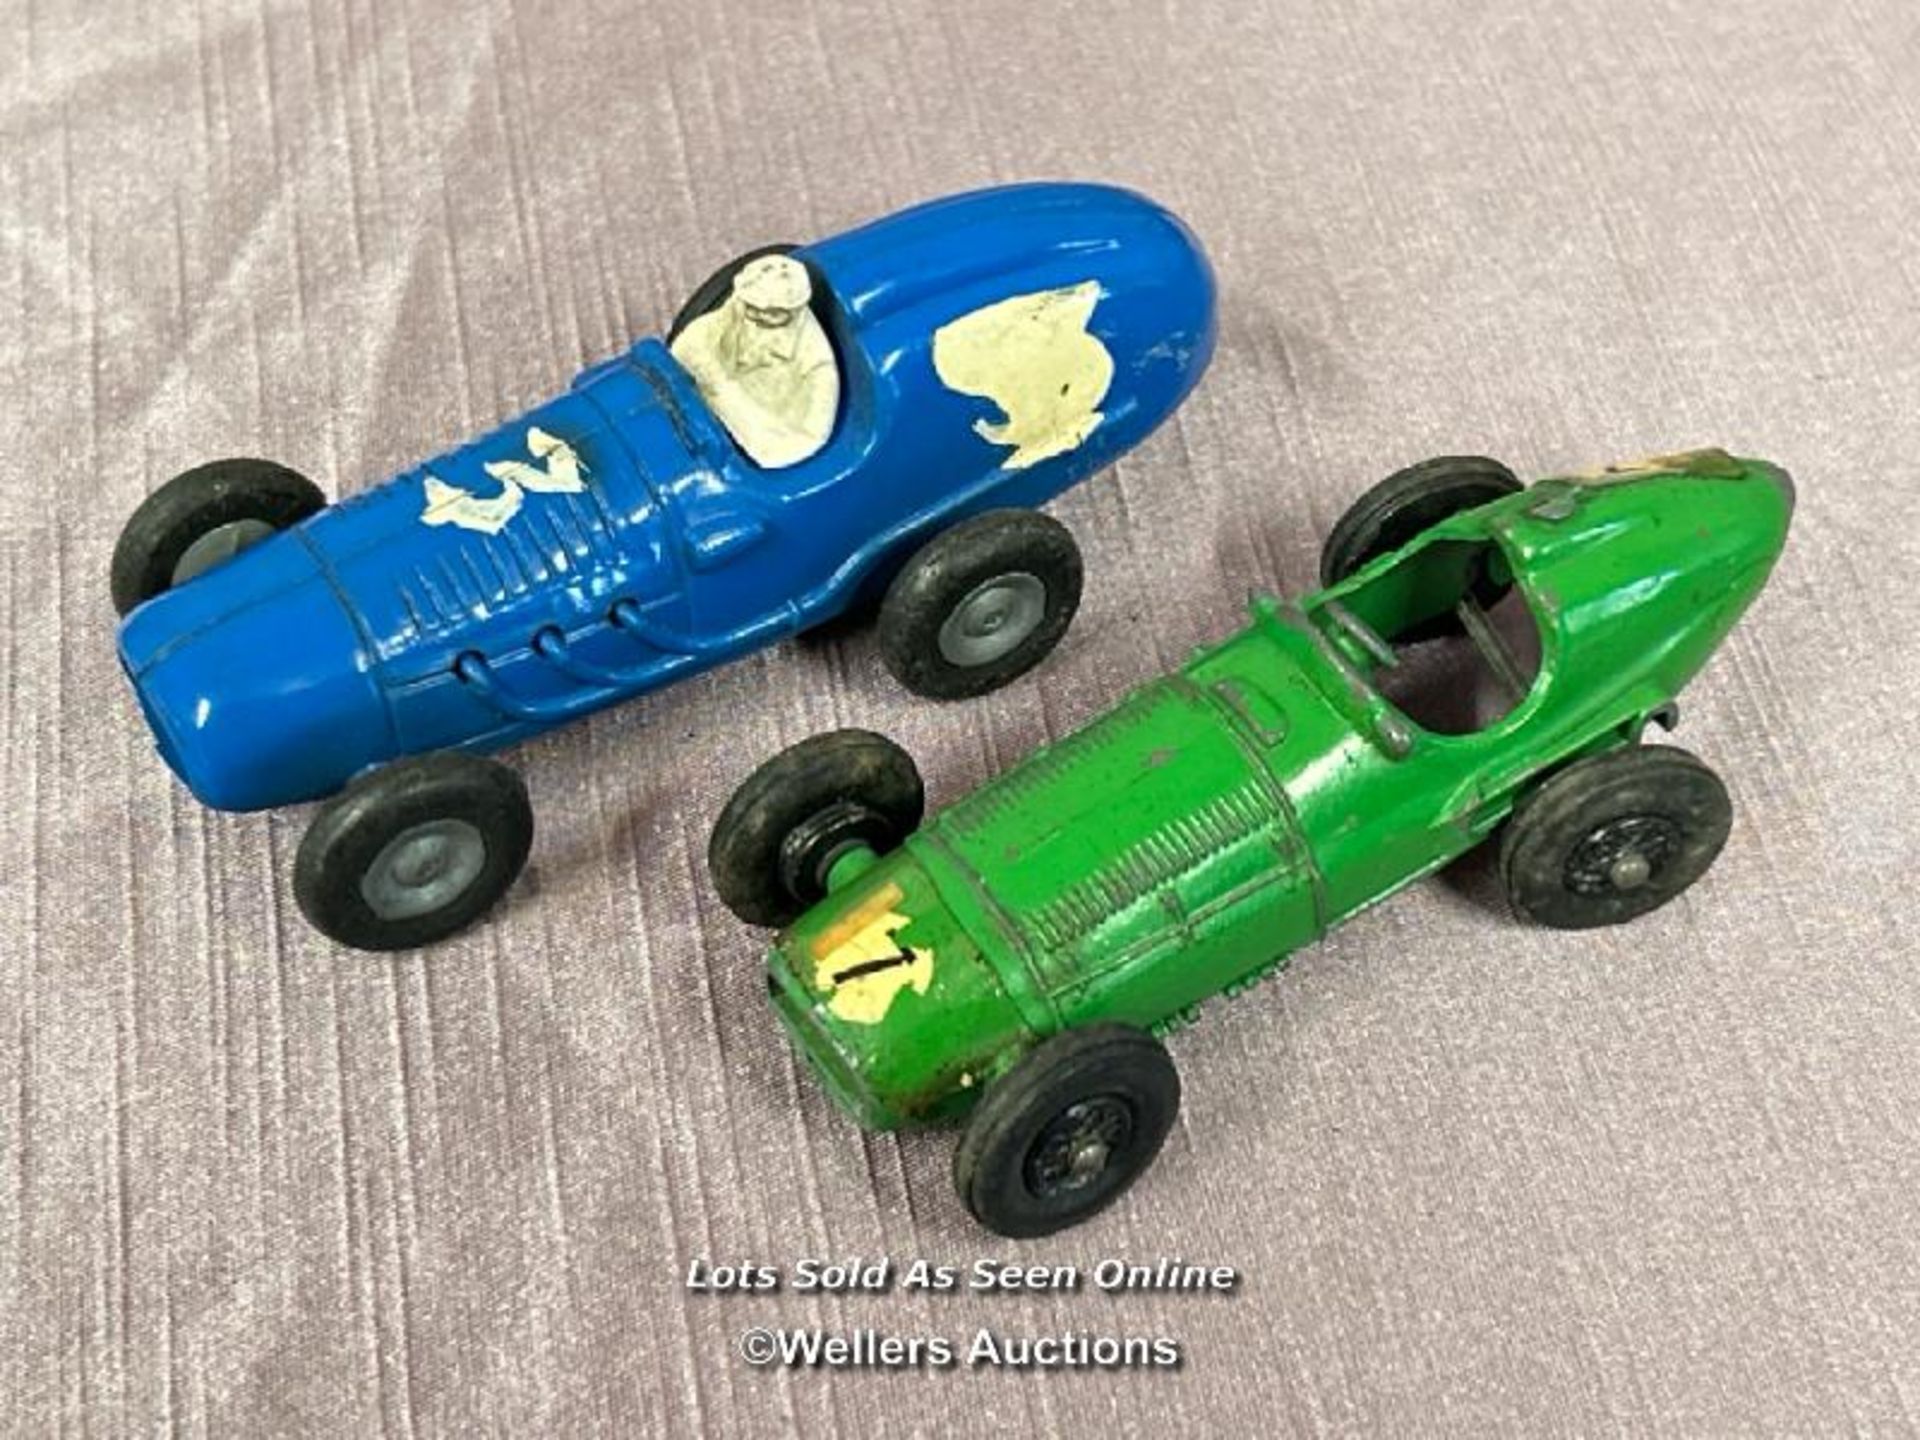 TWO MODEL CARS INCLUDING BLUE RACING CAR FOR SCALEXTRIC AND GREEN RACING CAR FRAME ONLY (AS FOUND)